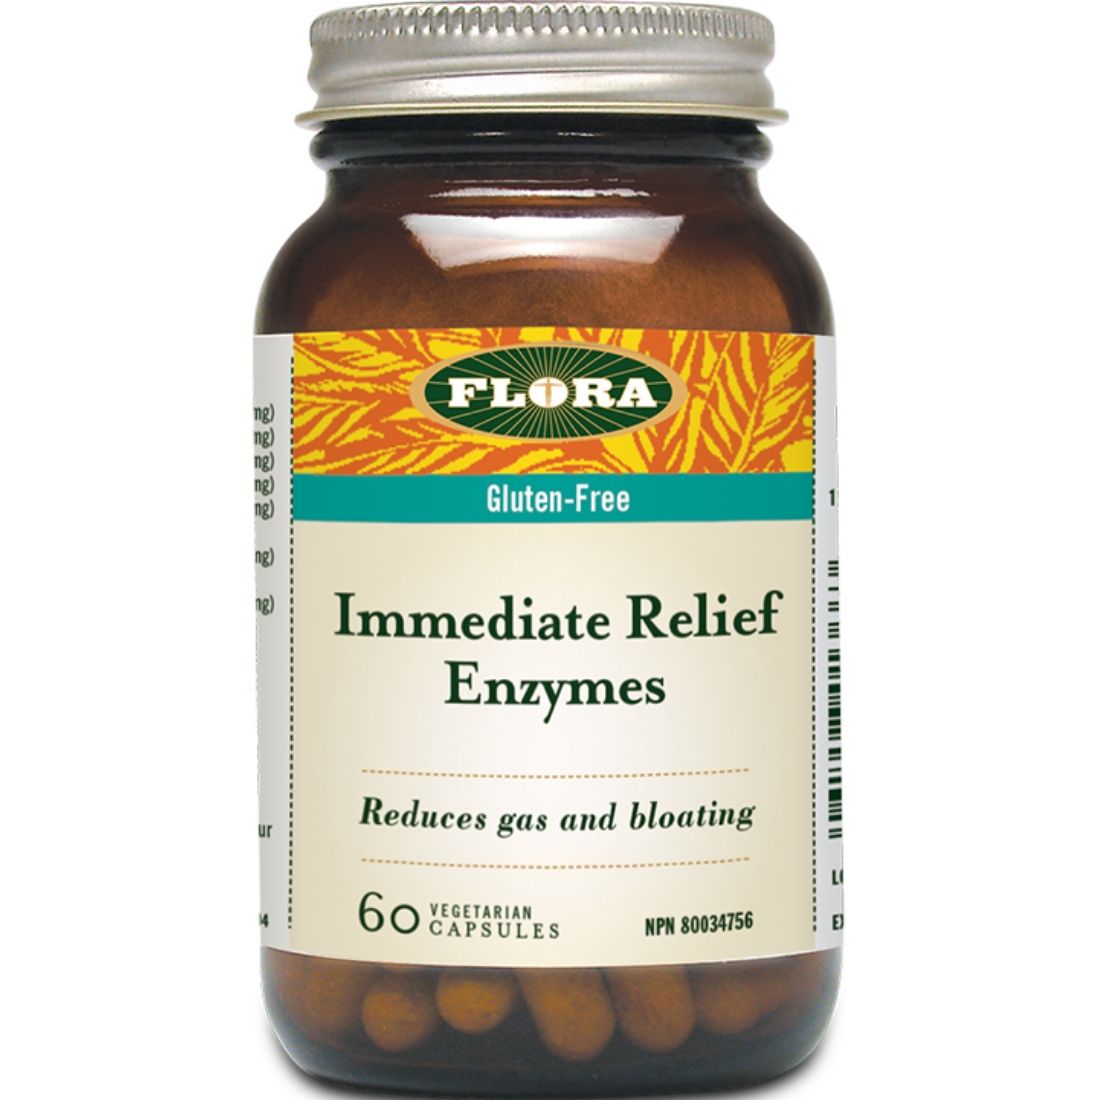 Flora Udos Choice Ultimate Digestive Enzyme - Immediate Relief